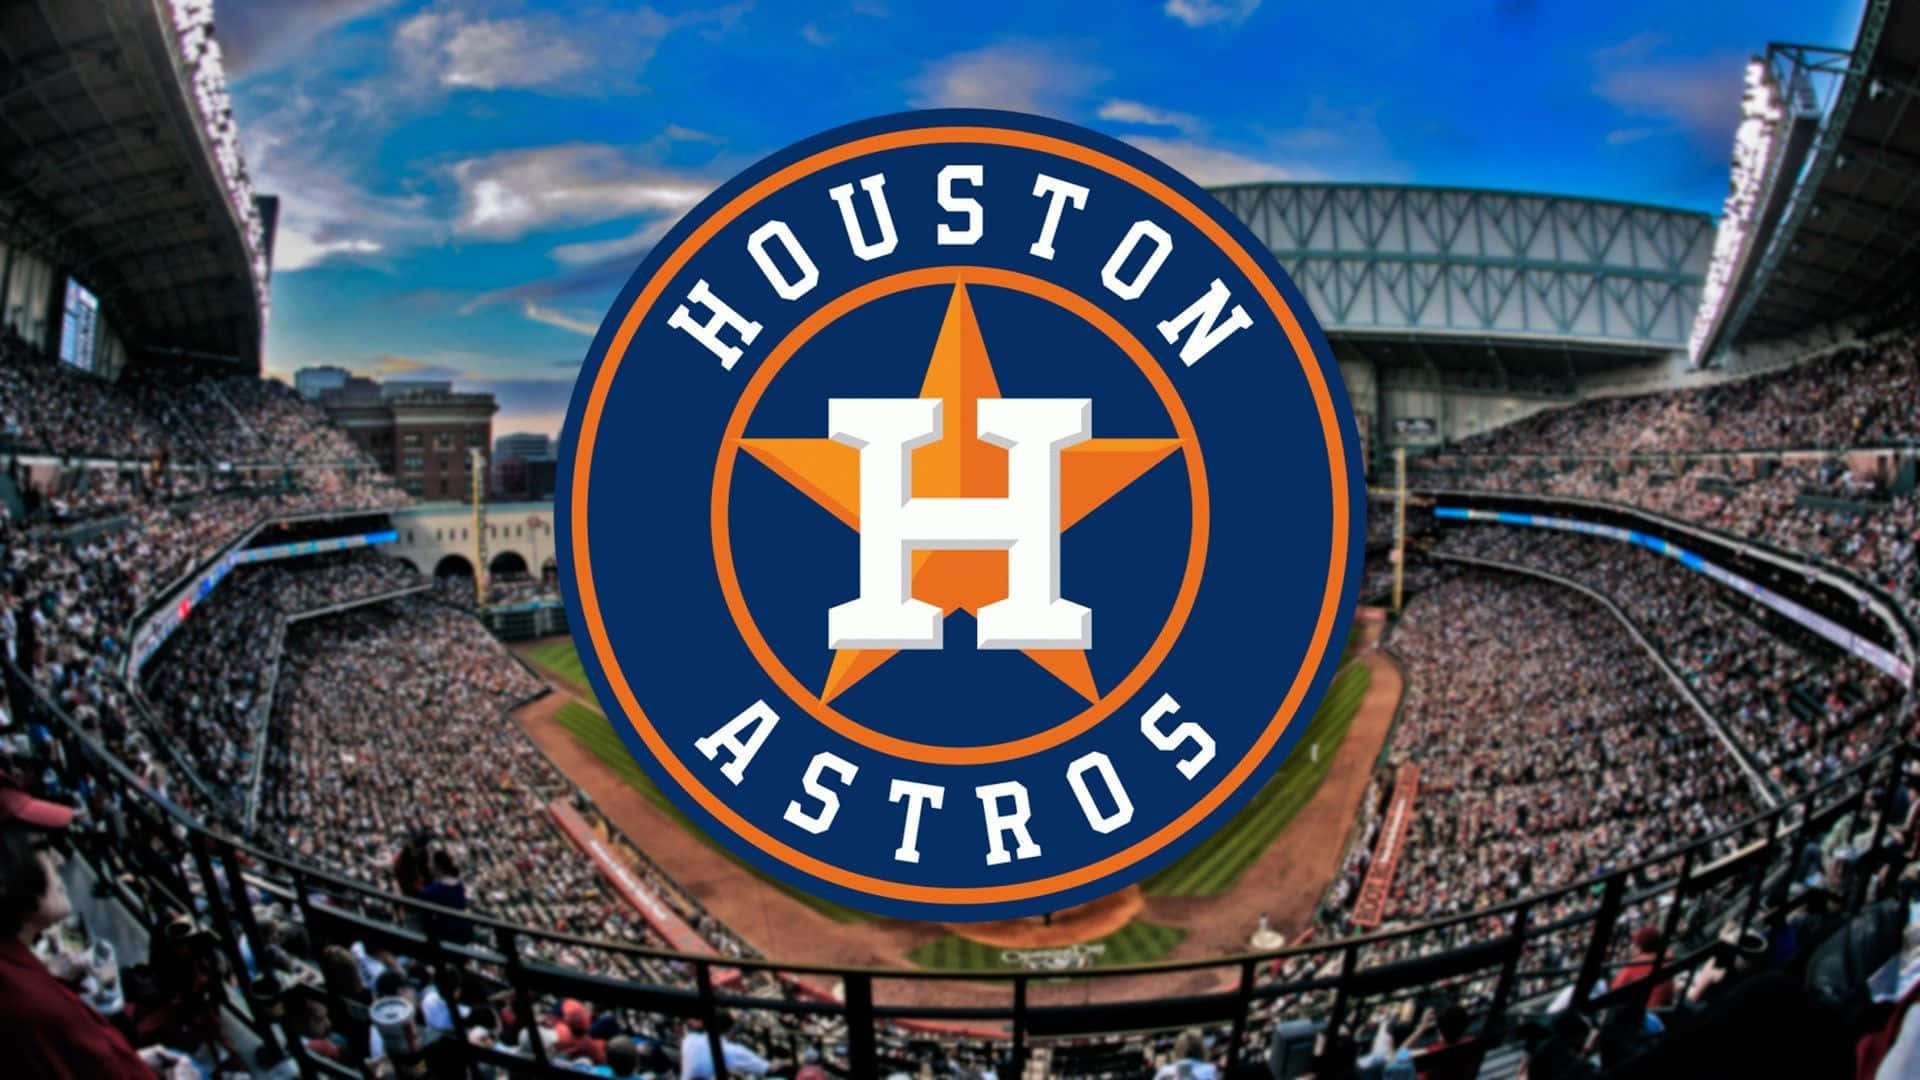 Caption: Houston Astros team in action on the field